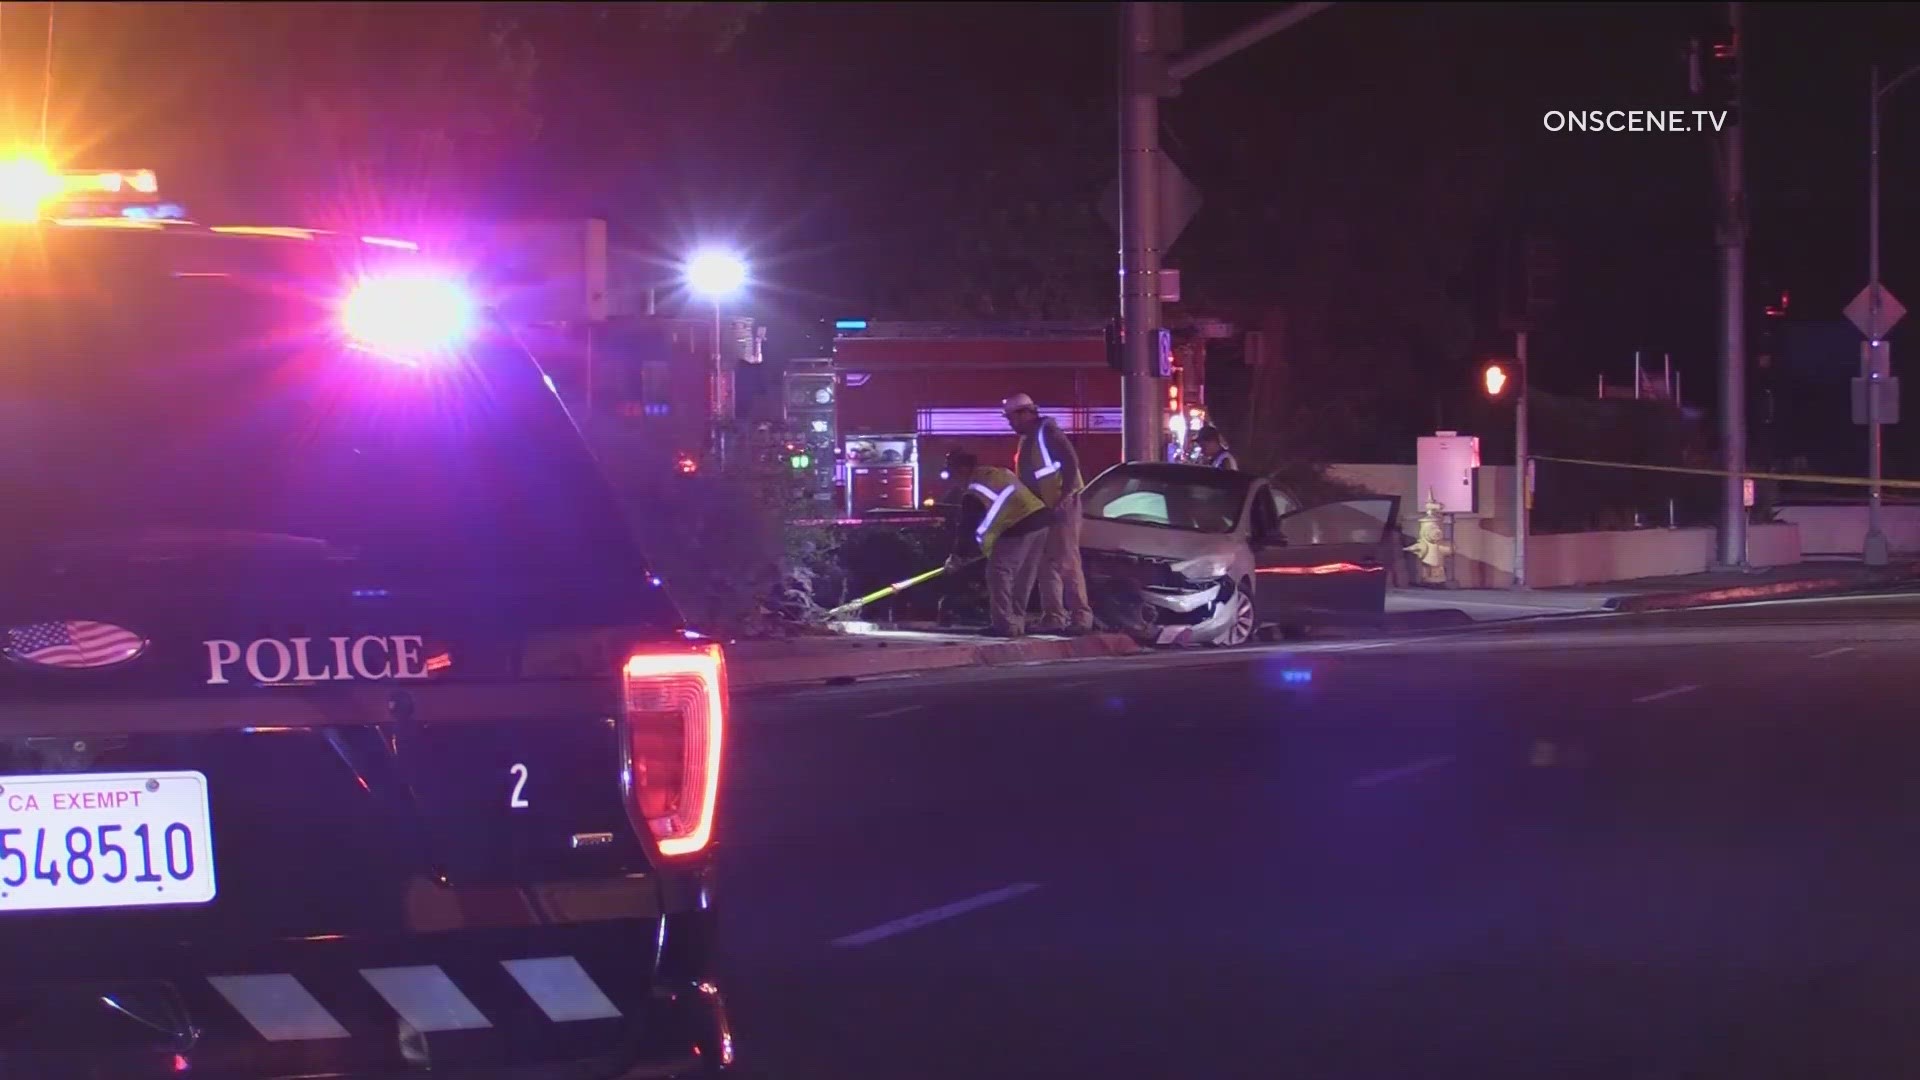 A Kia Forte crashed into an electrical box on Euclid Ave., leaving one dead.